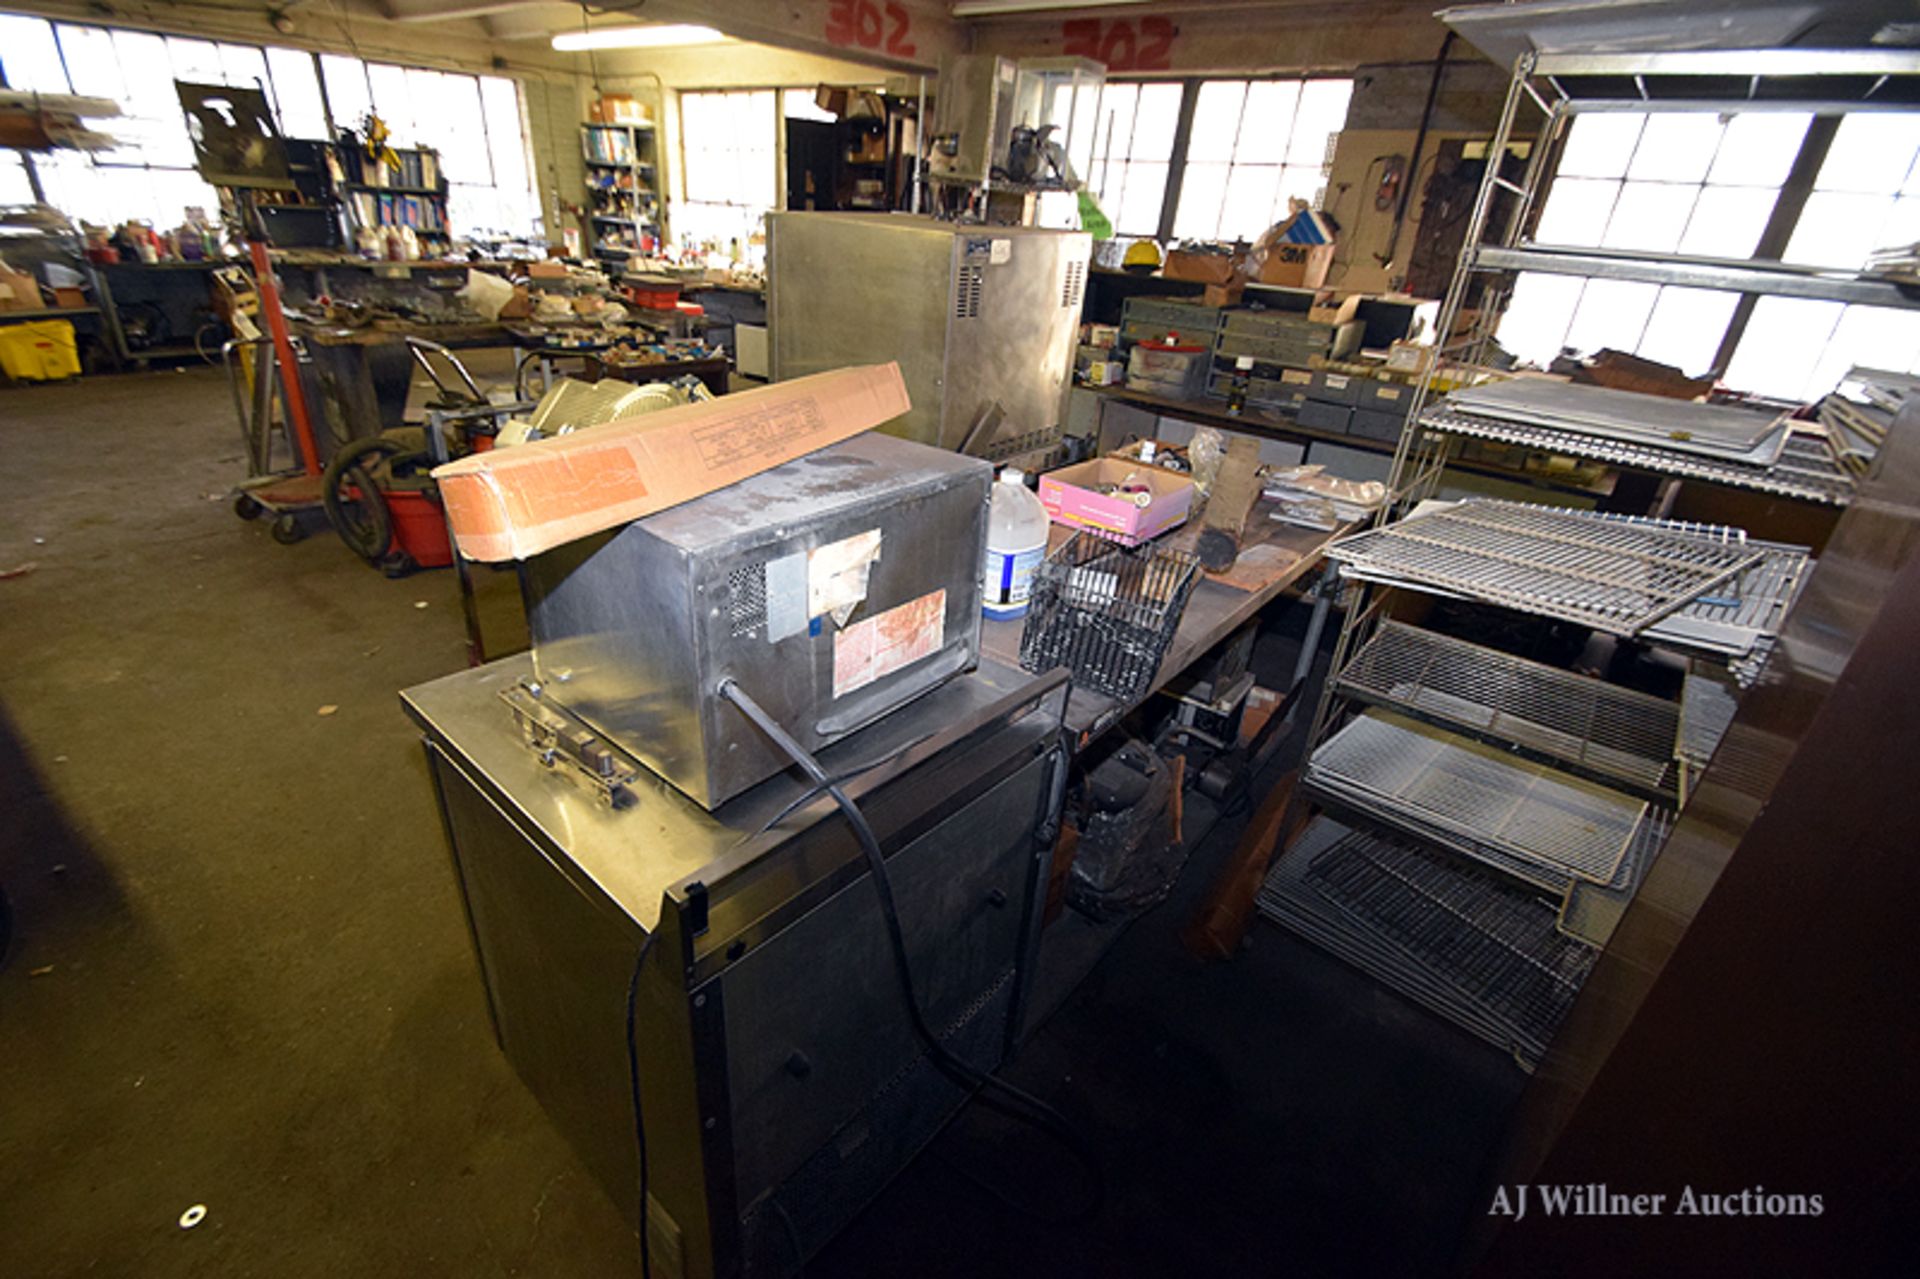 Contents of Workshop; Tools, Vacuums, Parts, Etc. - Image 9 of 13